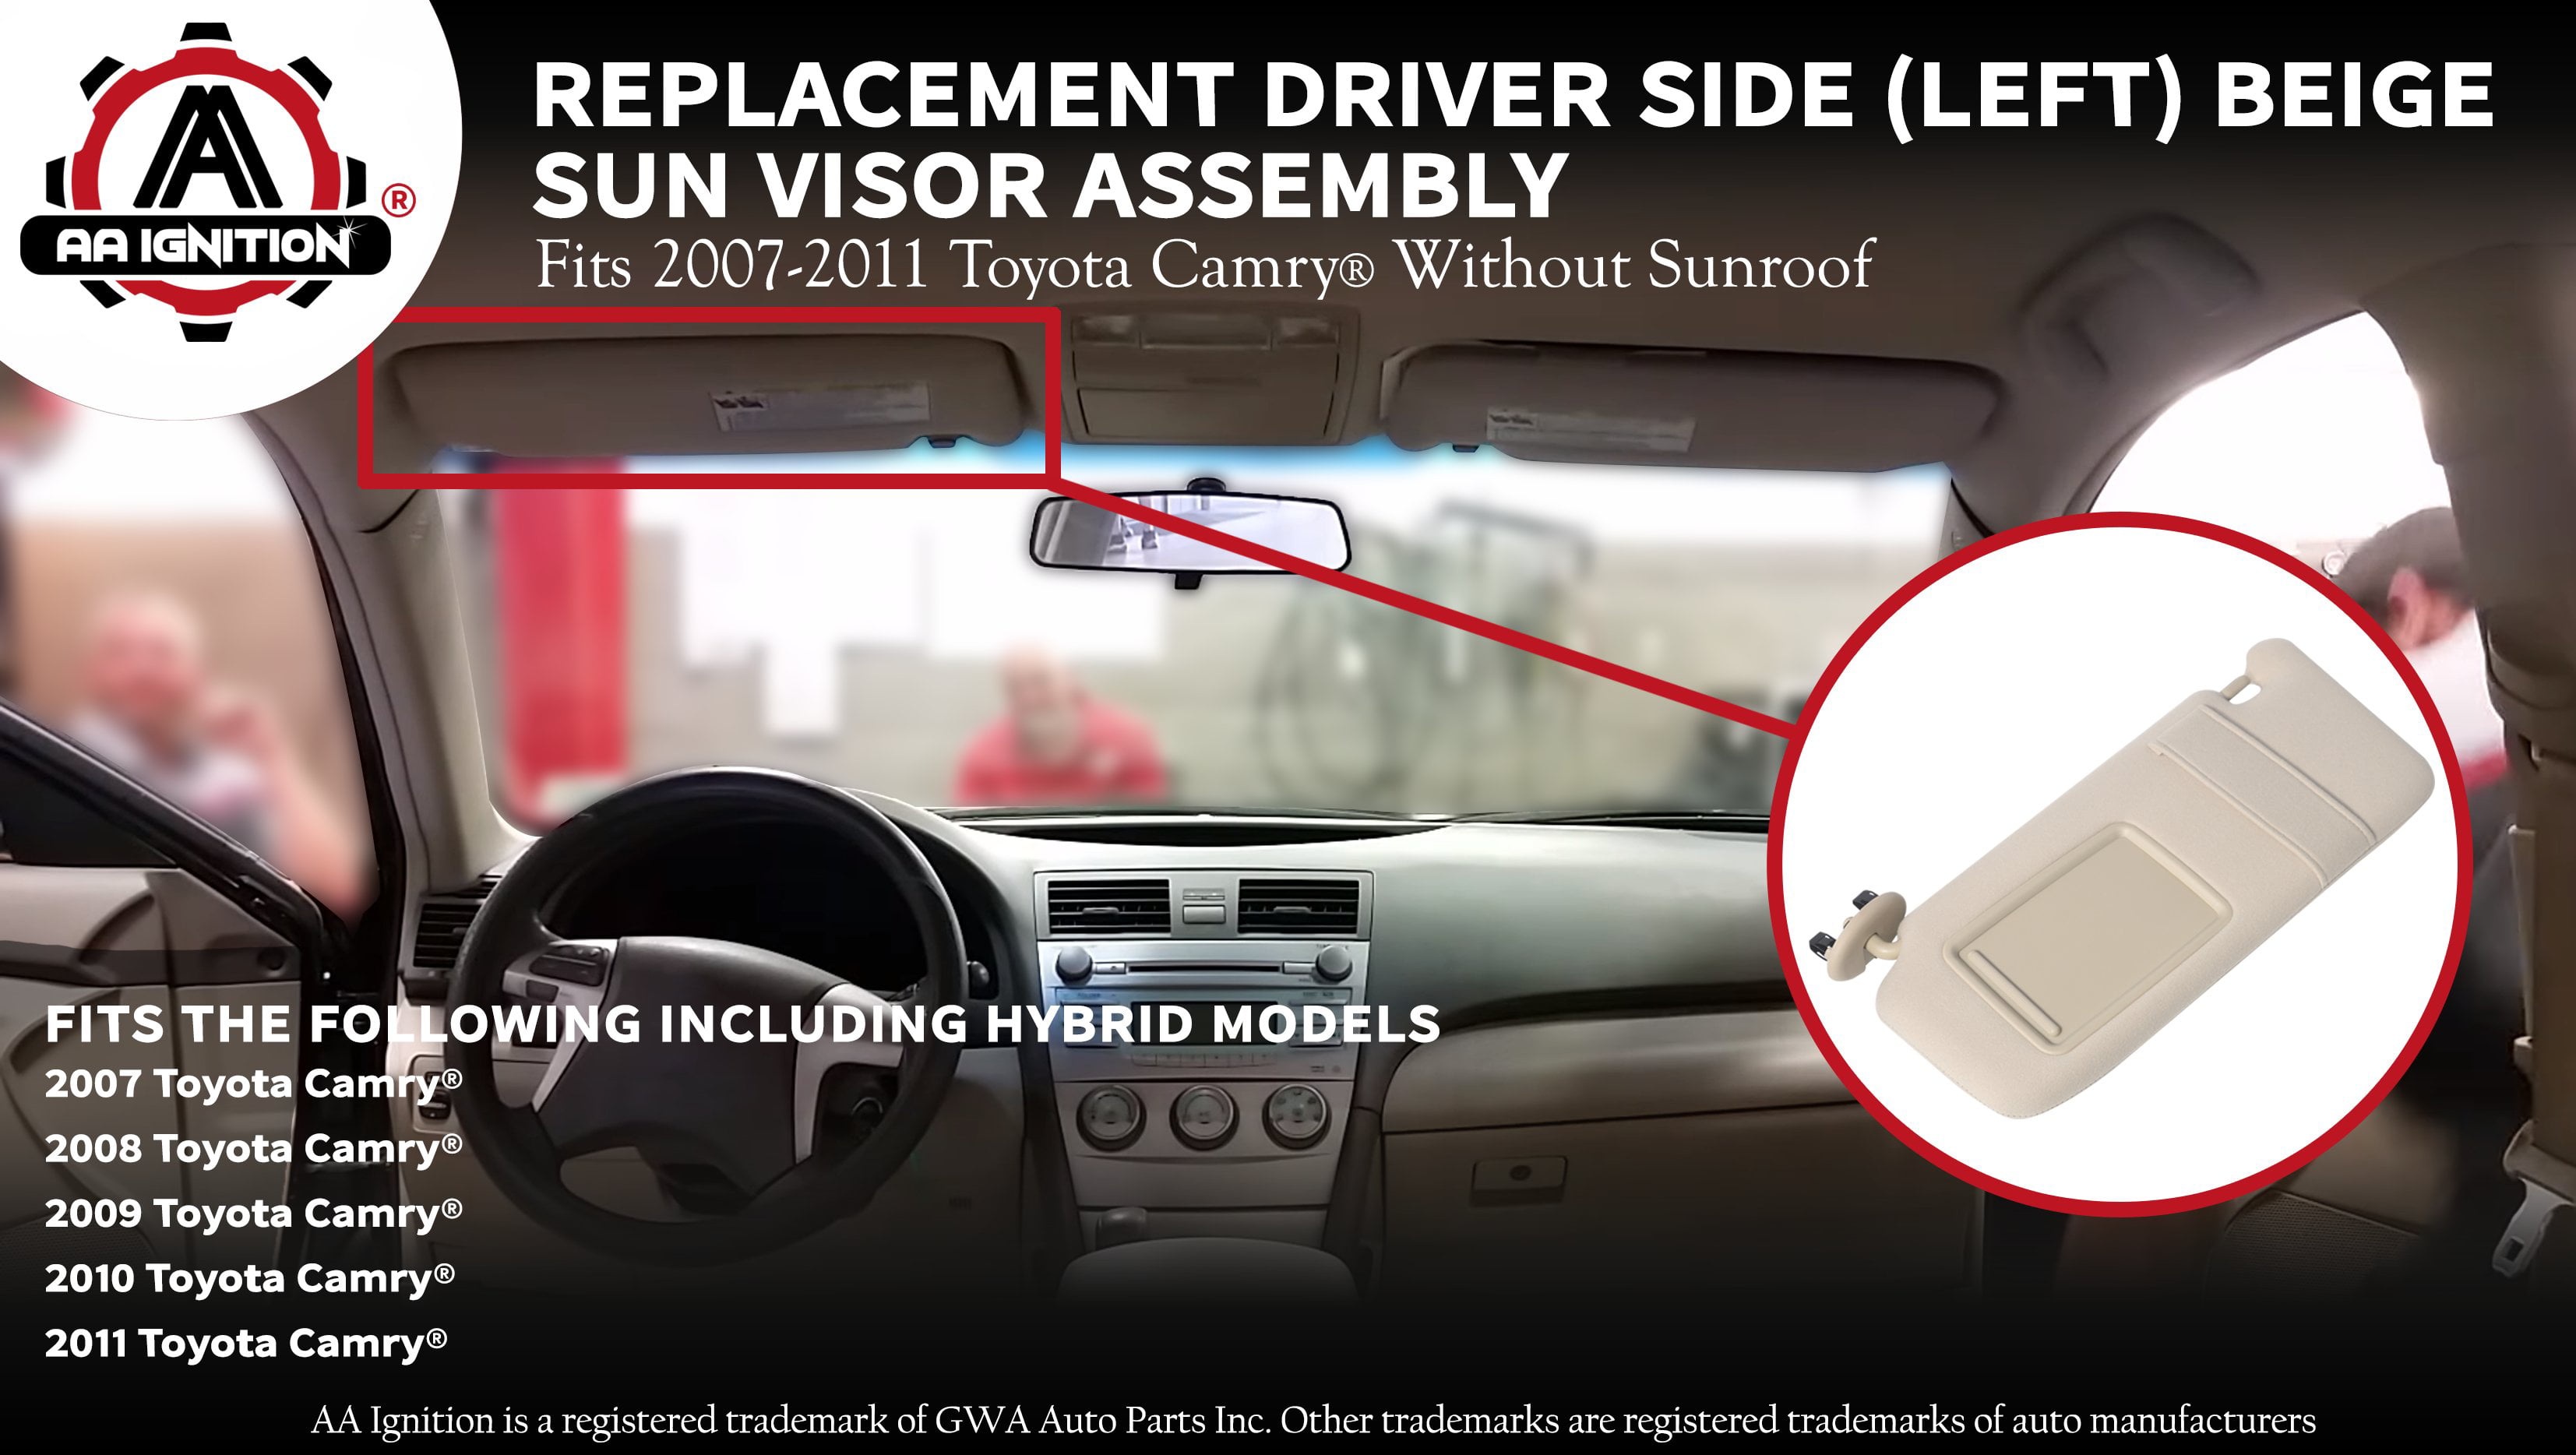 Beige Sun Visor for 2006 2007 2008 2009 2010 2011 Toyota Camry Without Sunroof and Lights Left Driver Side Replaces 74320-06780-E0 7432006780E0 